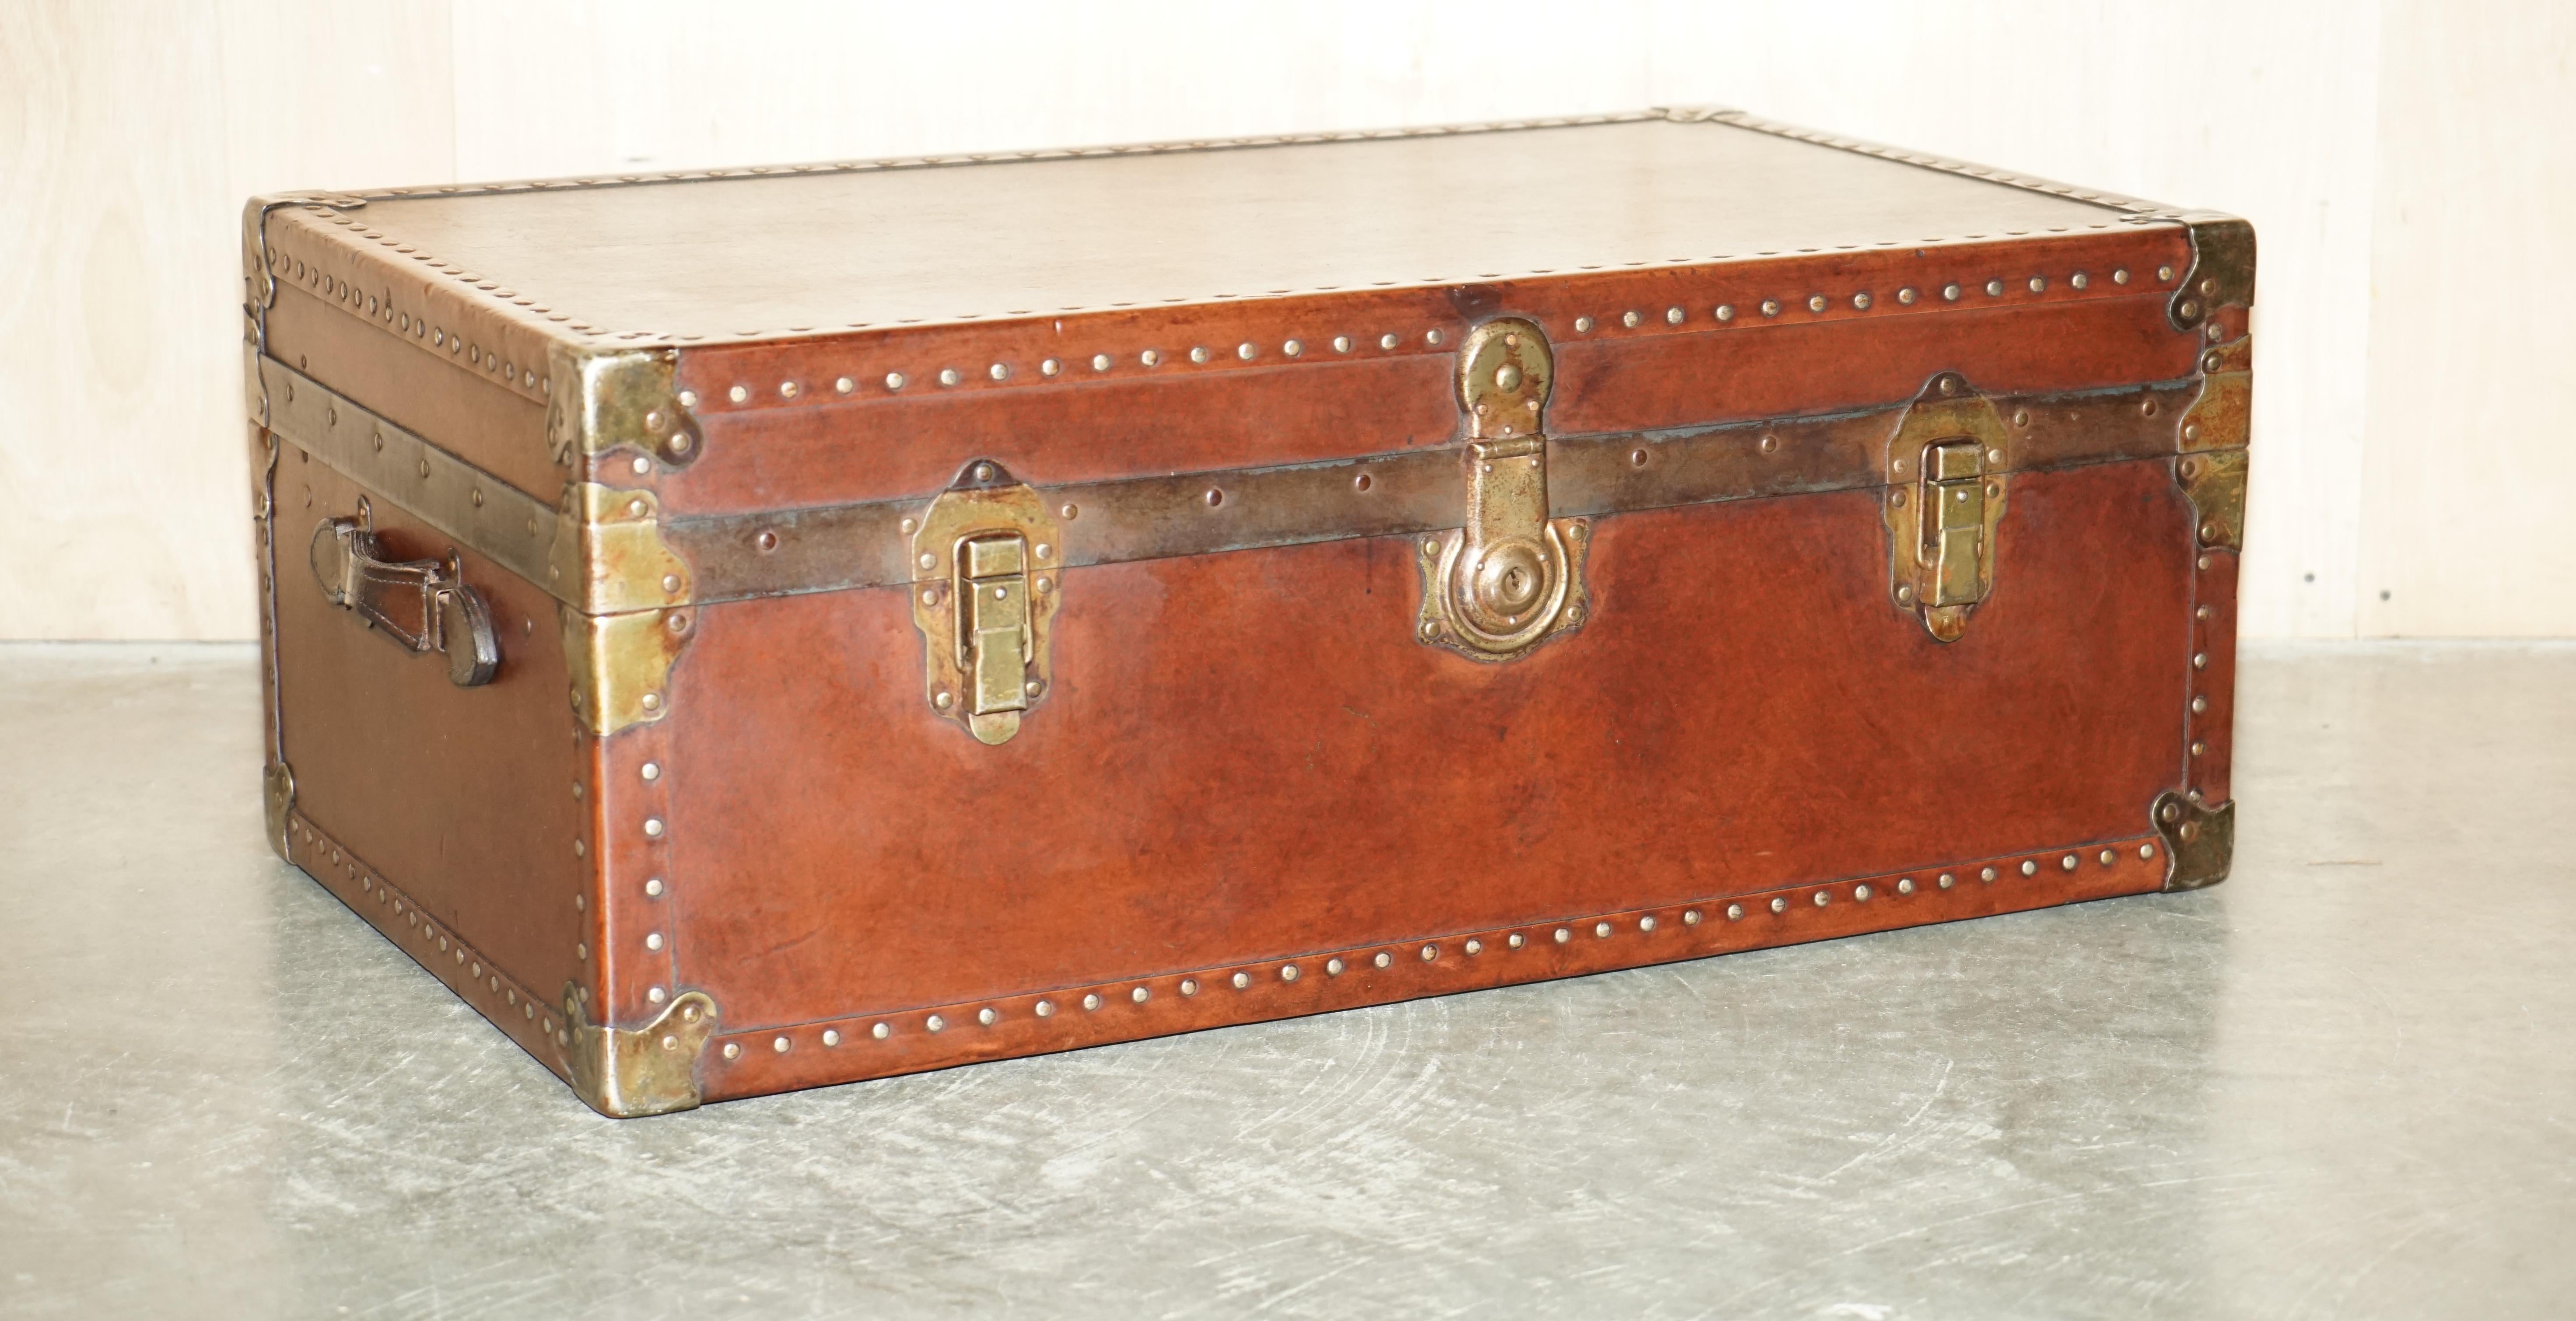 Royal House Antiques

Royal House Antiques is delighted to offer for sale this lovely decorative hand dyed brown leather steamer trunk with original internals that can be used as a coffee table 

Please note the delivery fee listed is just a guide,